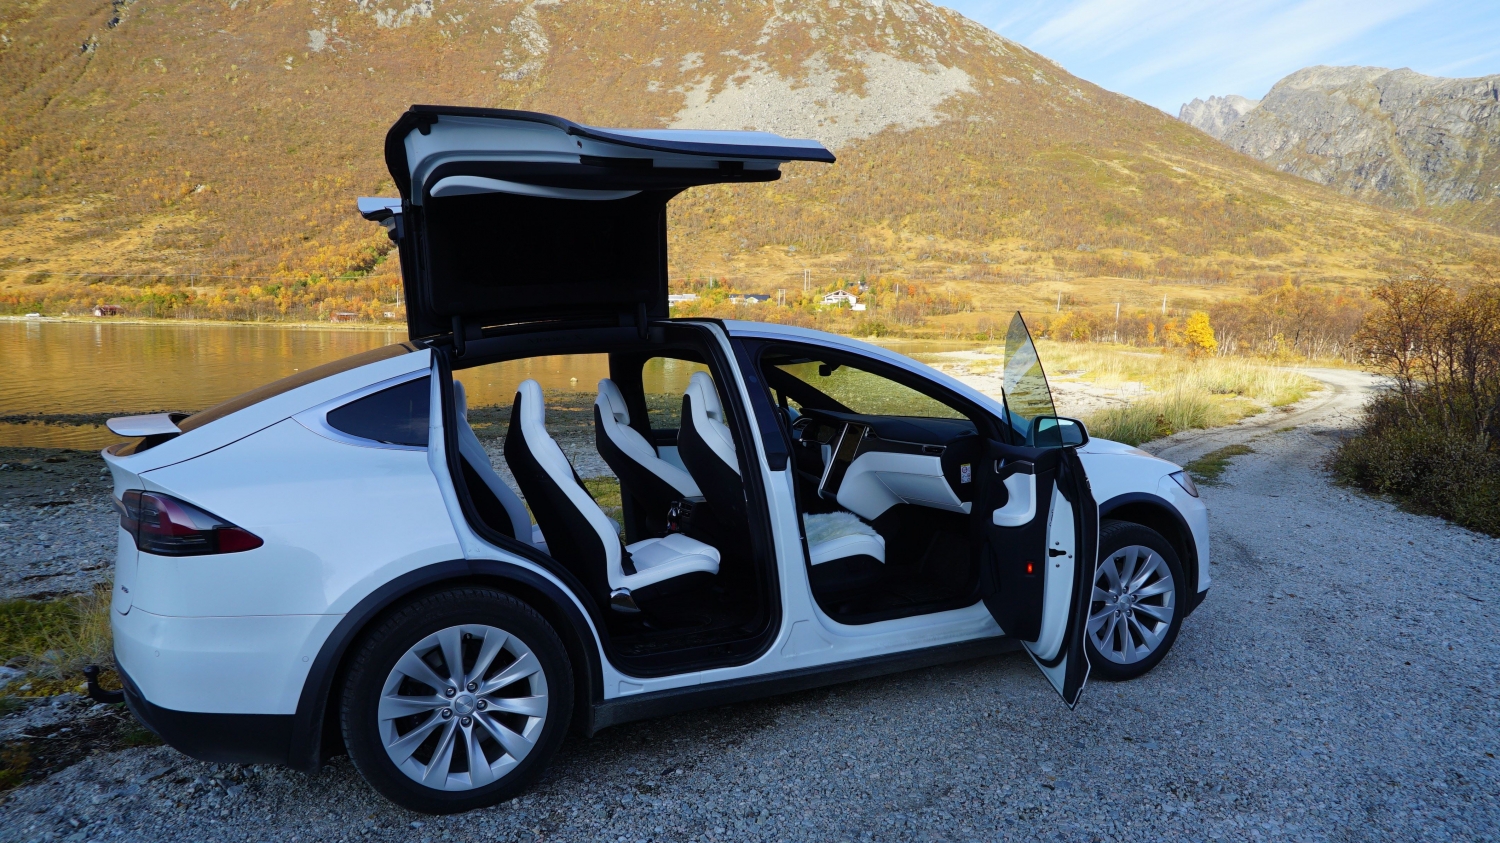 Three hours City Sightseeing from Tromsø with our eco-friendly Tesla Model X (AXCS)